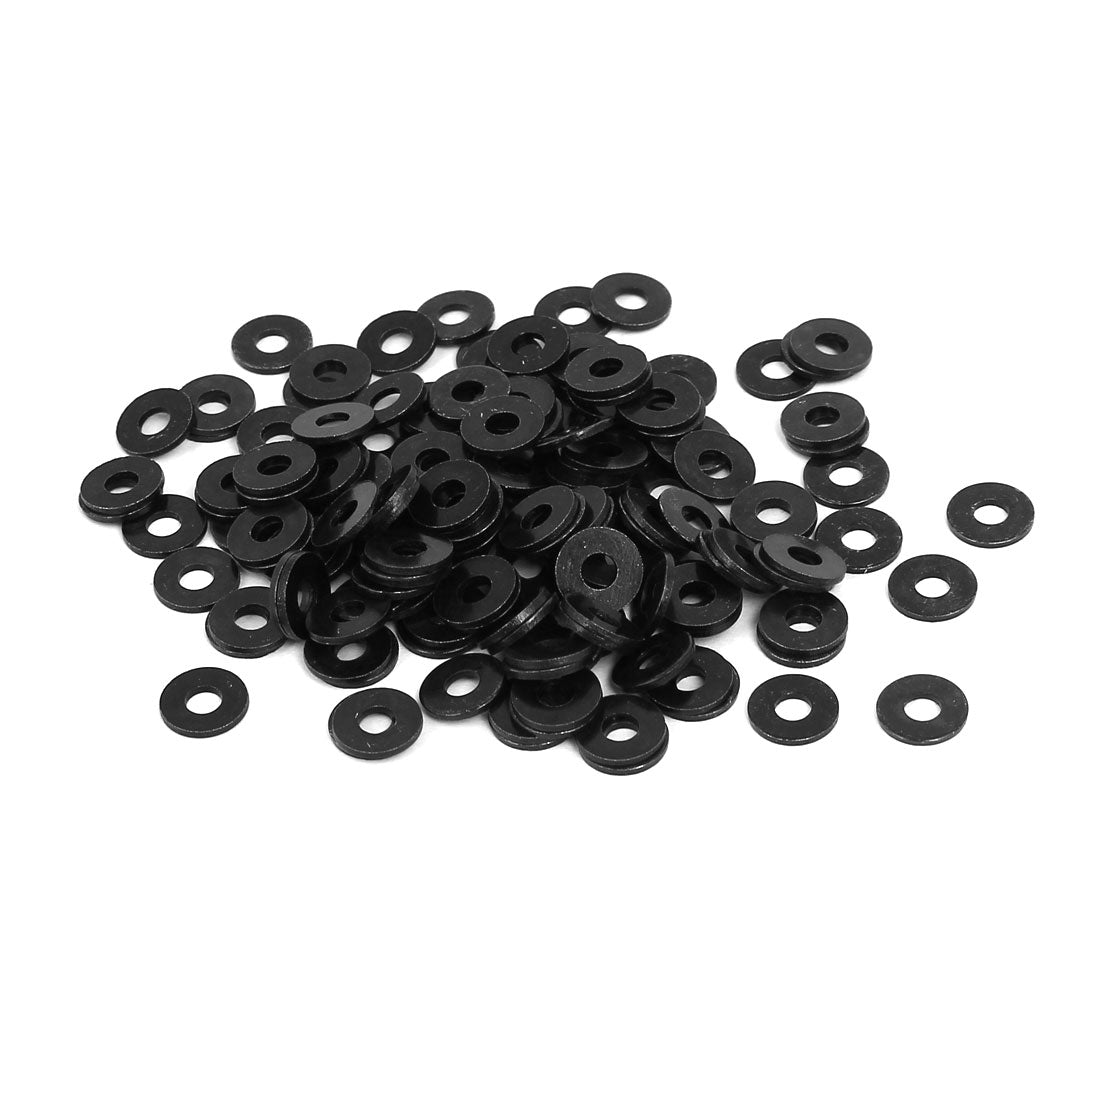 uxcell Uxcell M3 x 8mm x 0.8mm Black Zinc Plated Flat Pads Washers Gaskets Fastener 200PCS